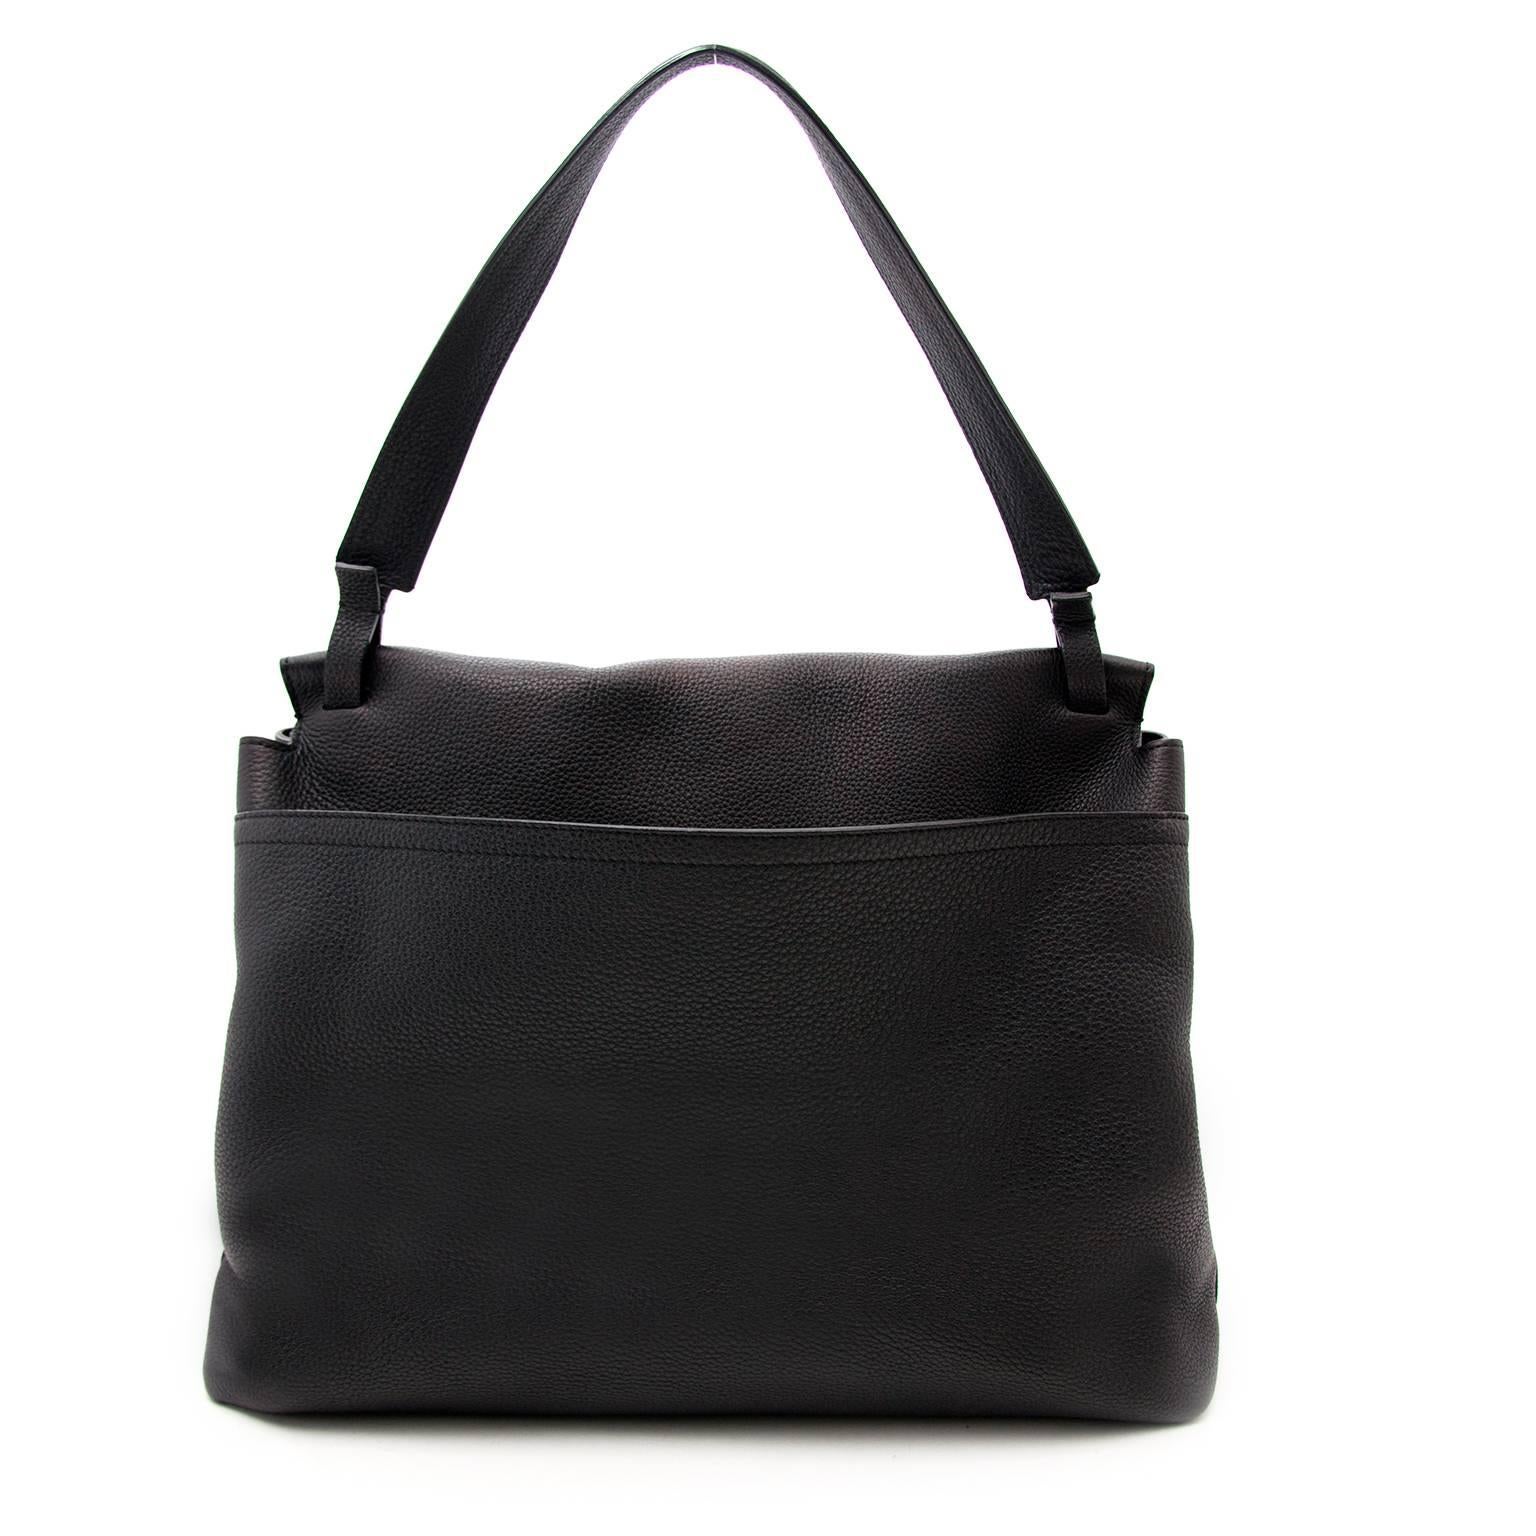 

The Row Black Leather Tote

The Row's tote bag is a luxe staple that promises to prove an envy-inducing mainstay for many seasons to come.
The beautiful leather features a roomy interior that's ideal for carrying all of your essentials. 